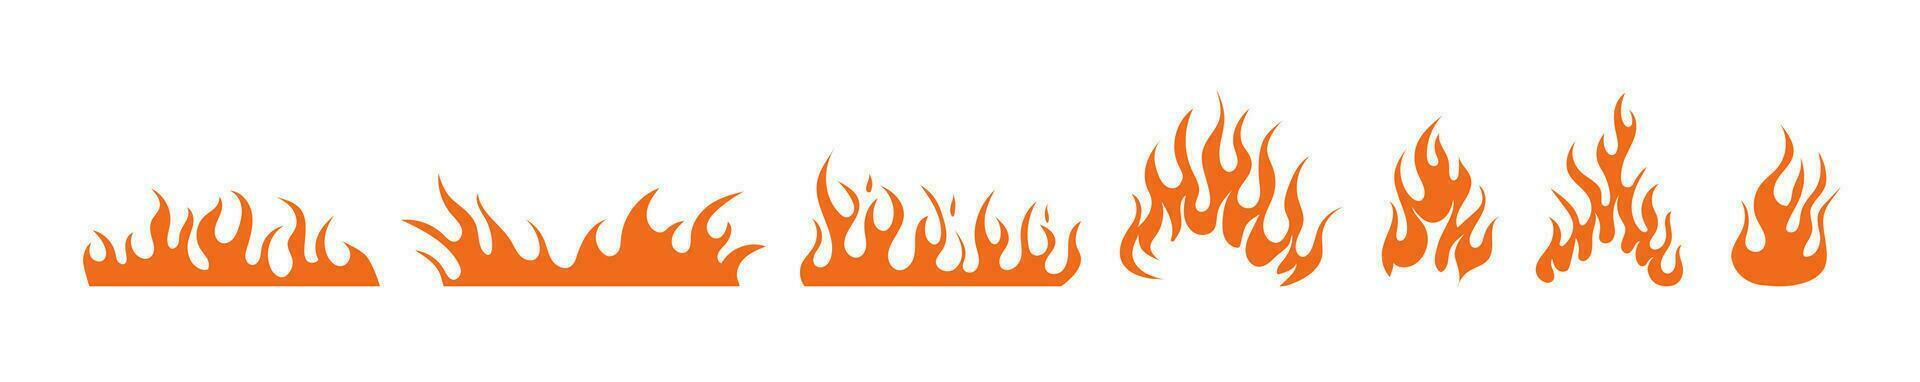 Fire vector silhouette illustration. Flame wildfire